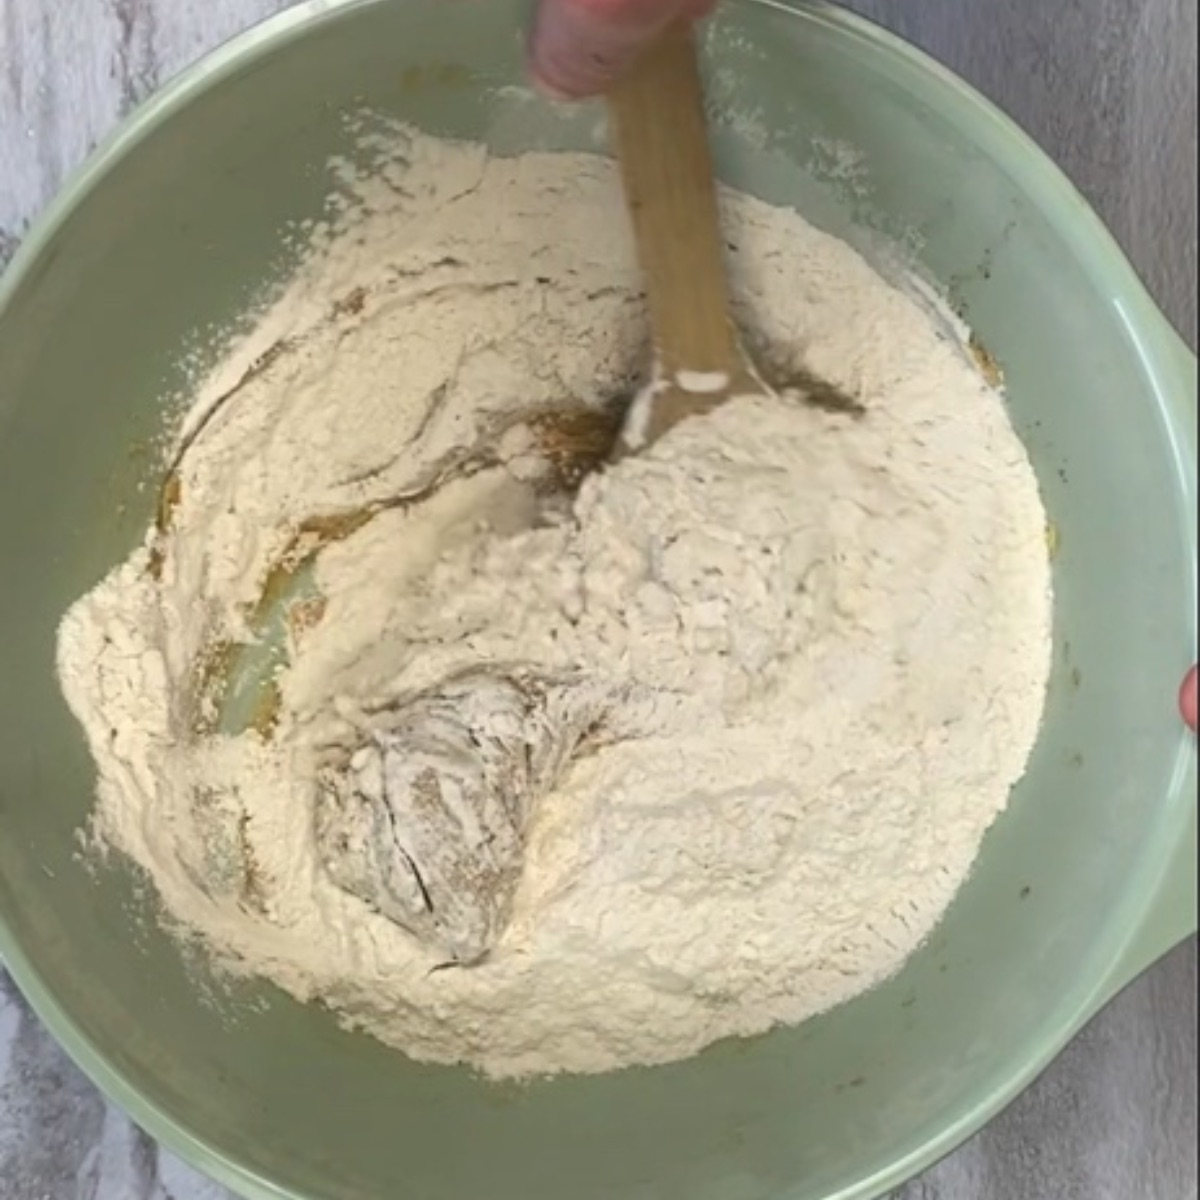 Overhead image of mixing bowl showing the flour being stirred into the butter sugar mixture